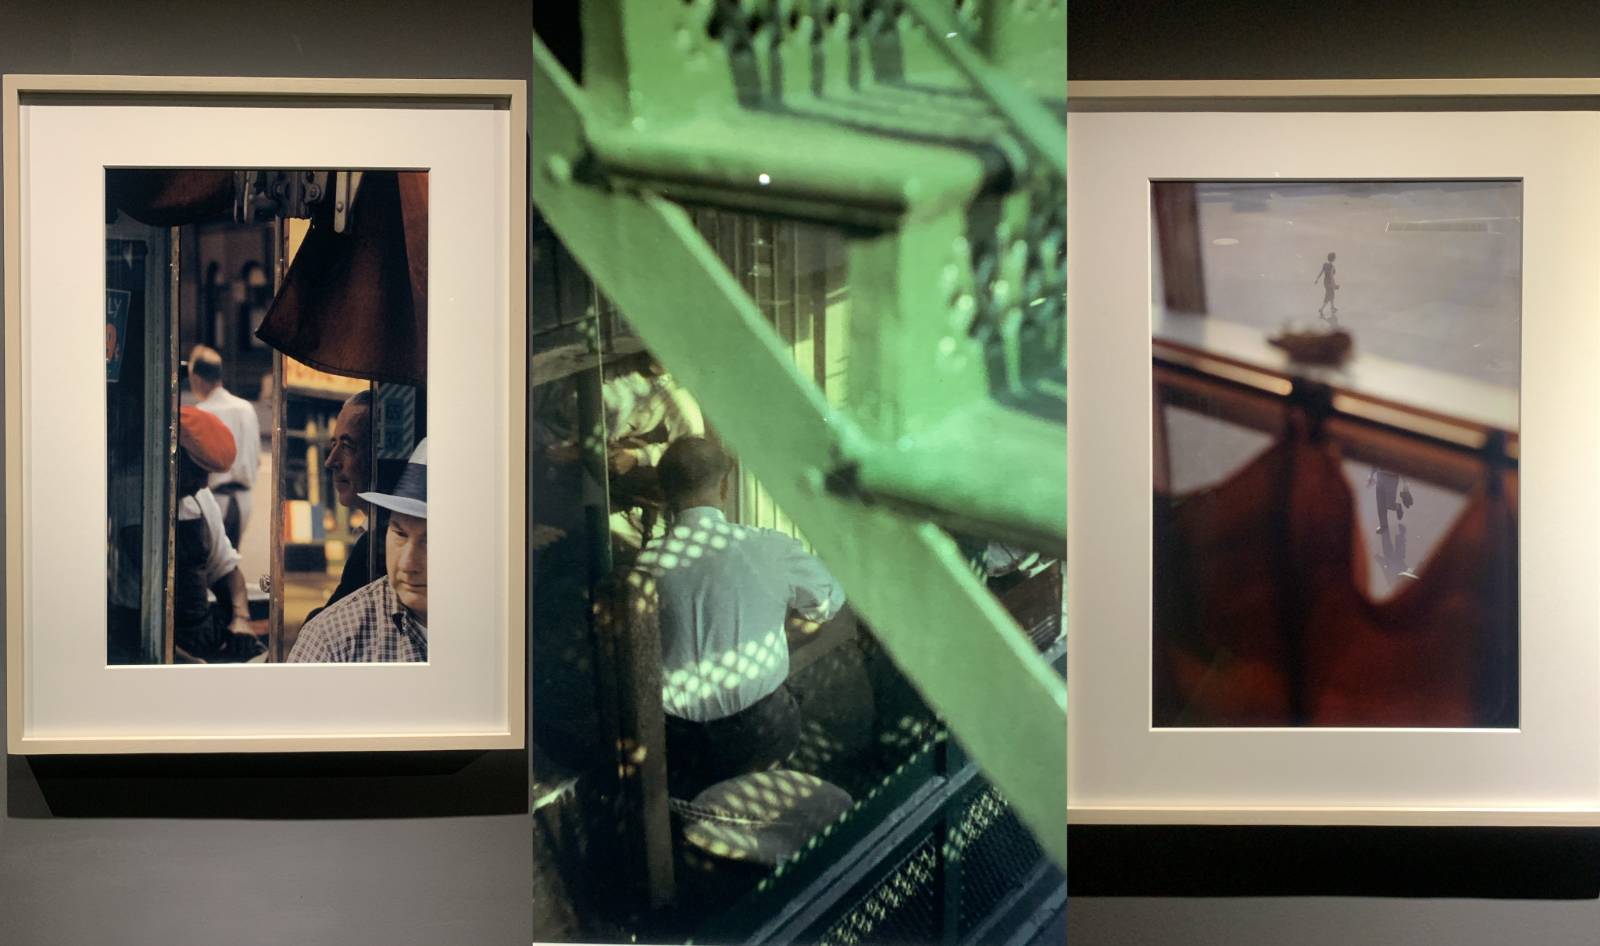 Reflection(1958), Tanager Steps (1952), Red Curtain (1956)